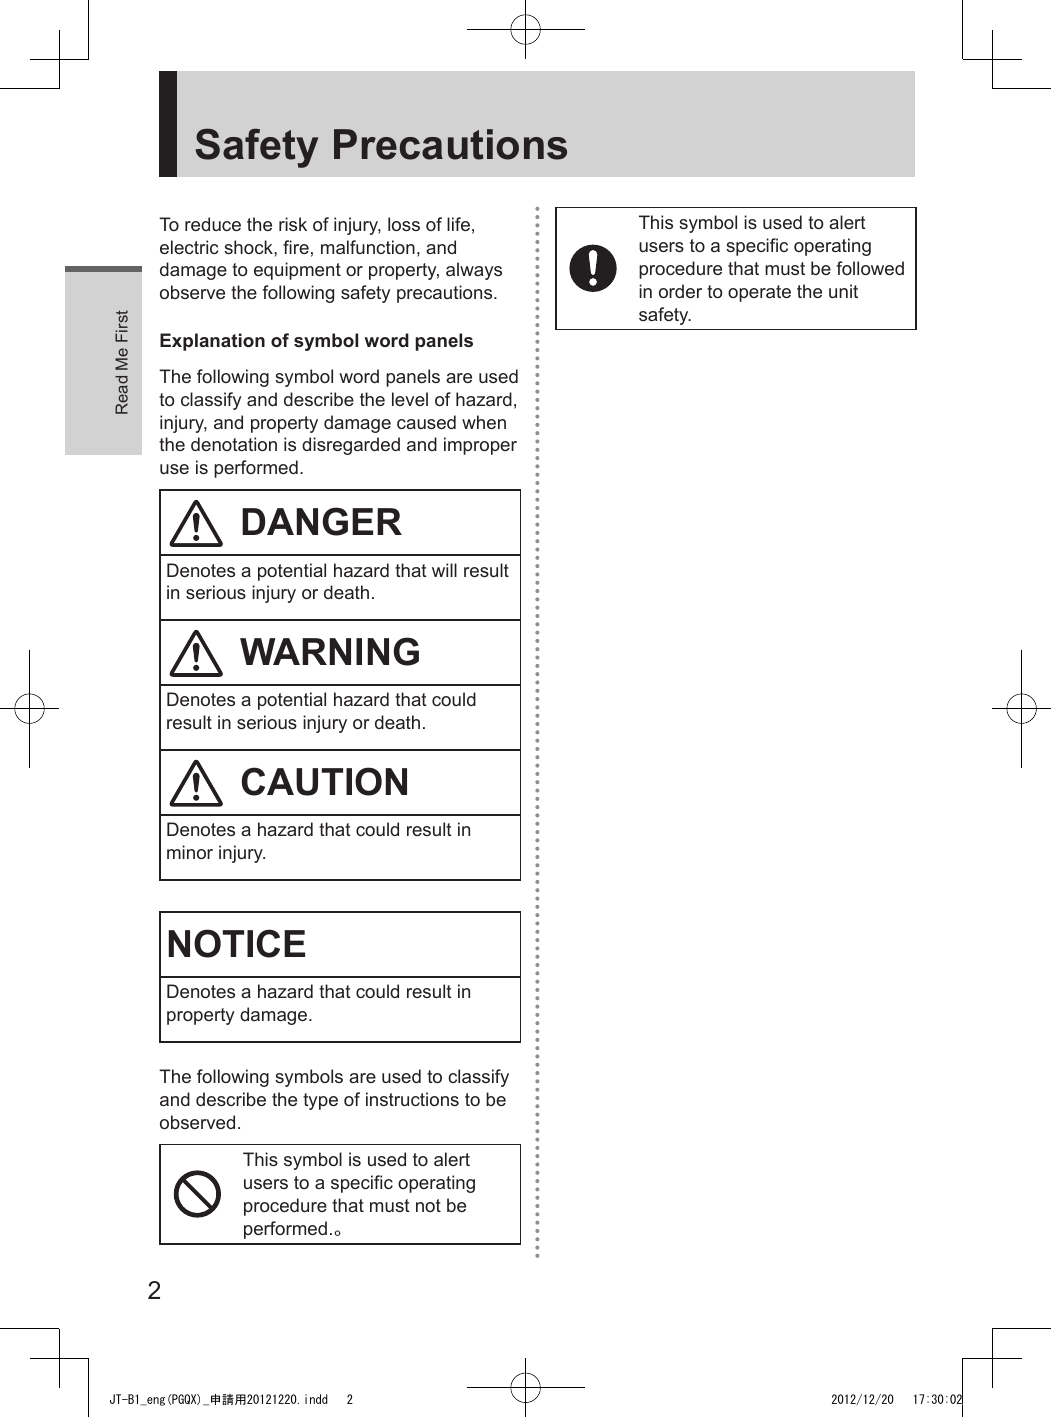 Read Me First2Safety PrecautionsTo reduce the risk of injury, loss of life, electric shock, fire, malfunction, and damage to equipment or property, always observe the following safety precautions.Explanation of symbol word panelsThe following symbol word panels are used to classify and describe the level of hazard, injury, and property damage caused when the denotation is disregarded and improper use is performed.DANGERDenotes a potential hazard that will result in serious injury or death.WARNINGDenotes a potential hazard that could result in serious injury or death.CAUTIONDenotes a hazard that could result in minor injury.NOTICEDenotes a hazard that could result in property damage.The following symbols are used to classify and describe the type of instructions to be observed.This symbol is used to alert users to a specific operating procedure that must not be performed.。This symbol is used to alert users to a specific operating procedure that must be followed in order to operate the unit safety.JT-B1_eng(PGQX)_申請用20121220.indd   2 2012/12/20   17:30:02